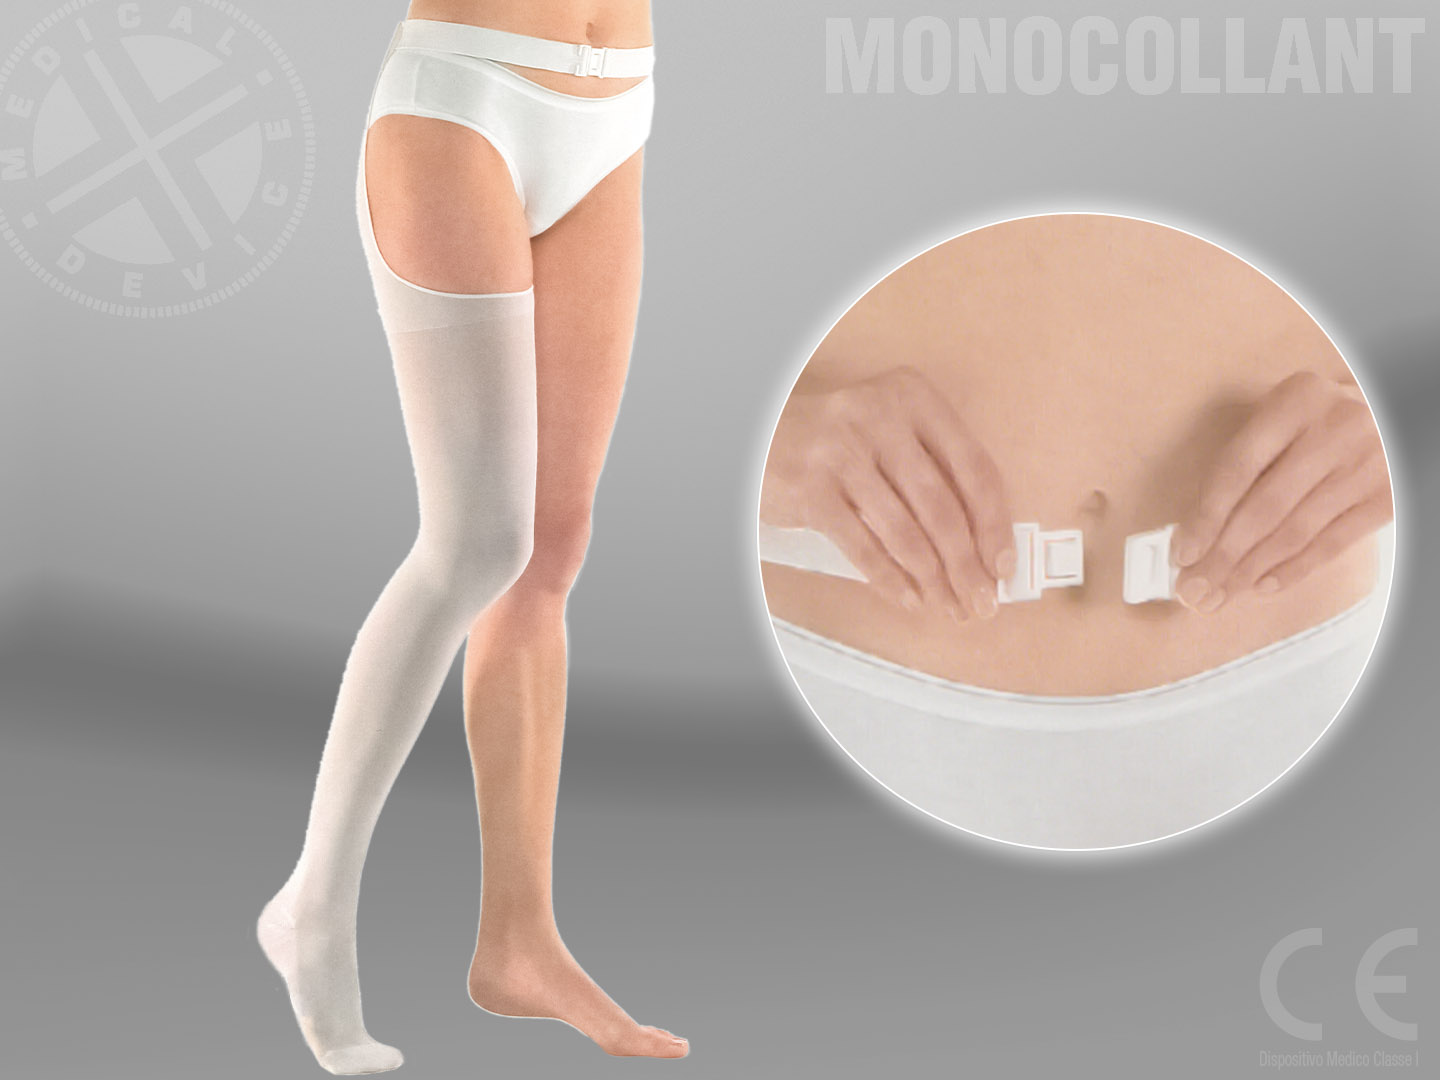 elly anti-embolism one-legged tights apply the clinically-proven graduated pressure